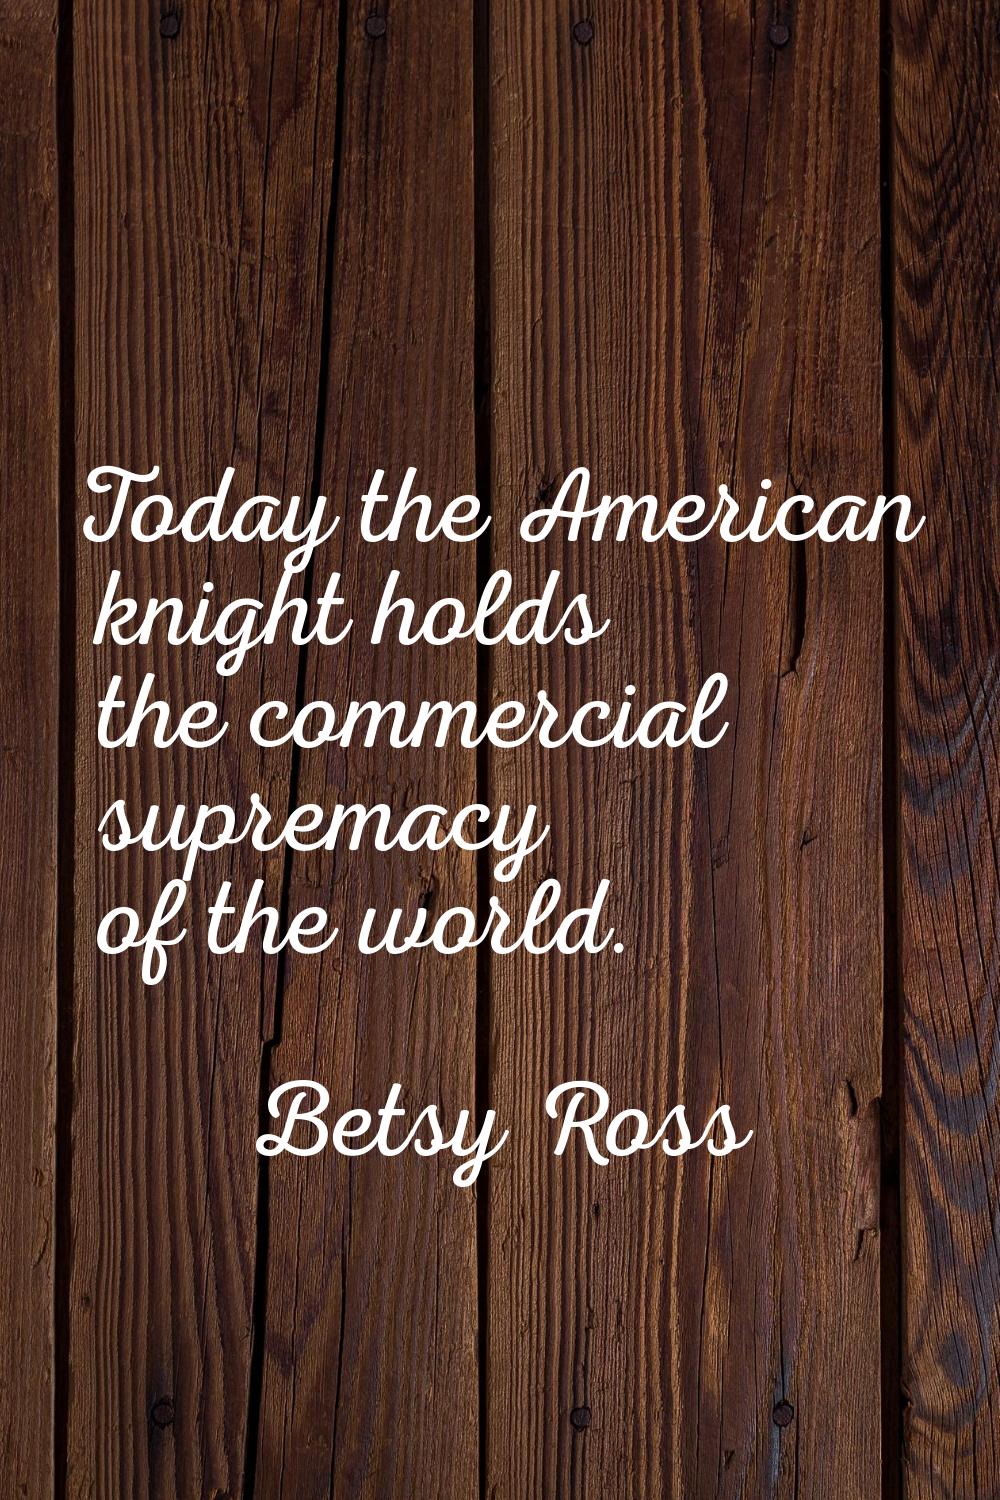 Today the American knight holds the commercial supremacy of the world.